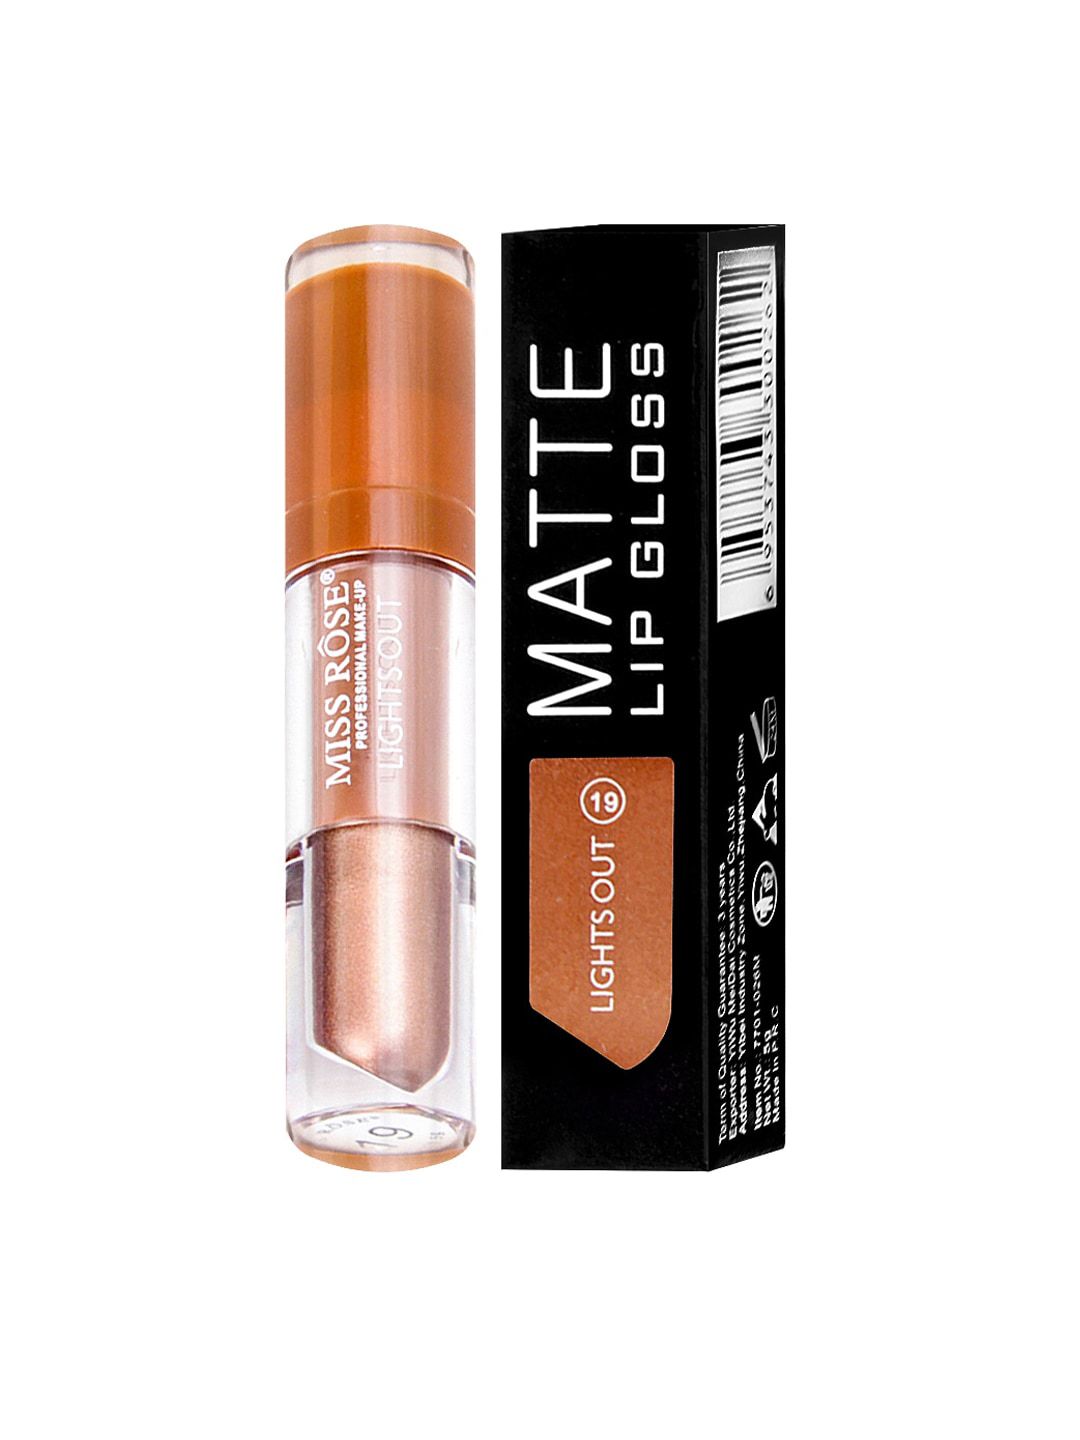 MISS ROSE Matte LipGloss Lights Out 7701-026M 19 20 gm Price in India